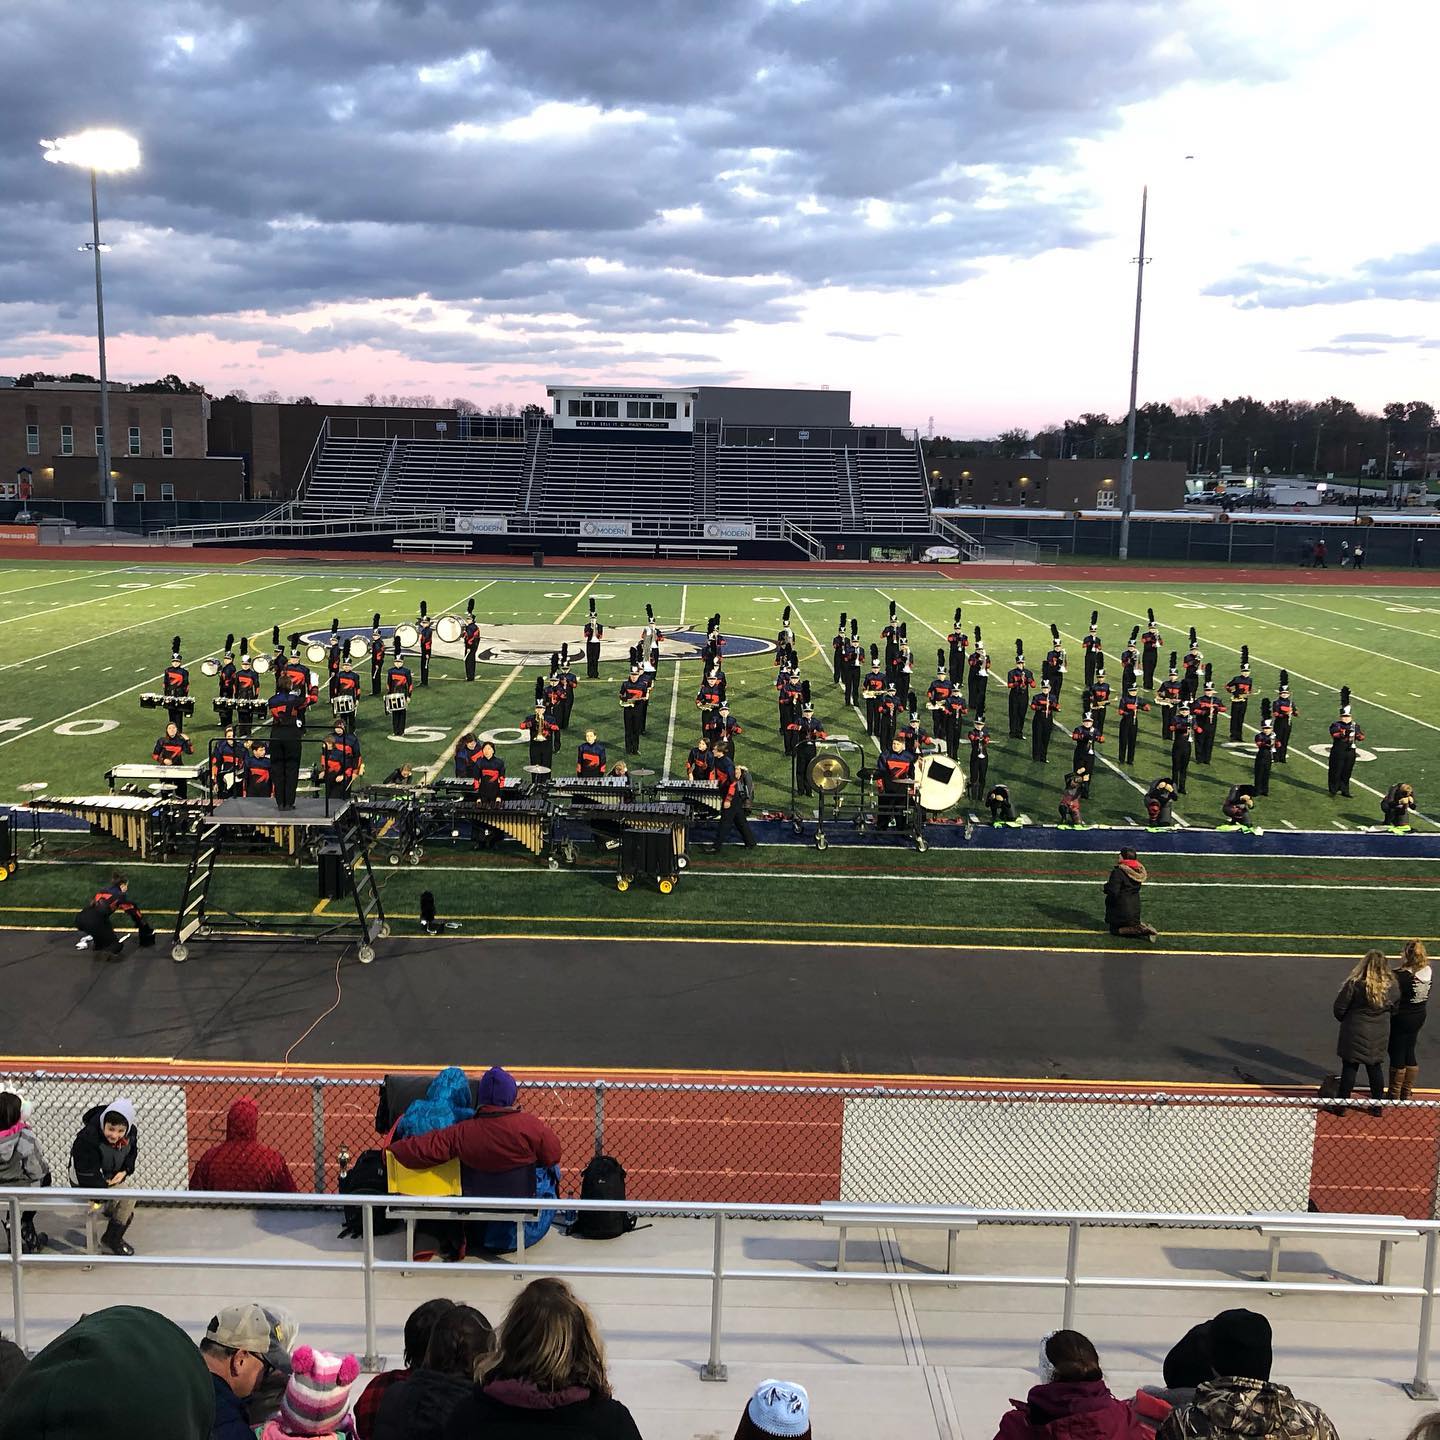 Final competition of the year. So proud of @isnackcheatham and all the Brave. 🥁